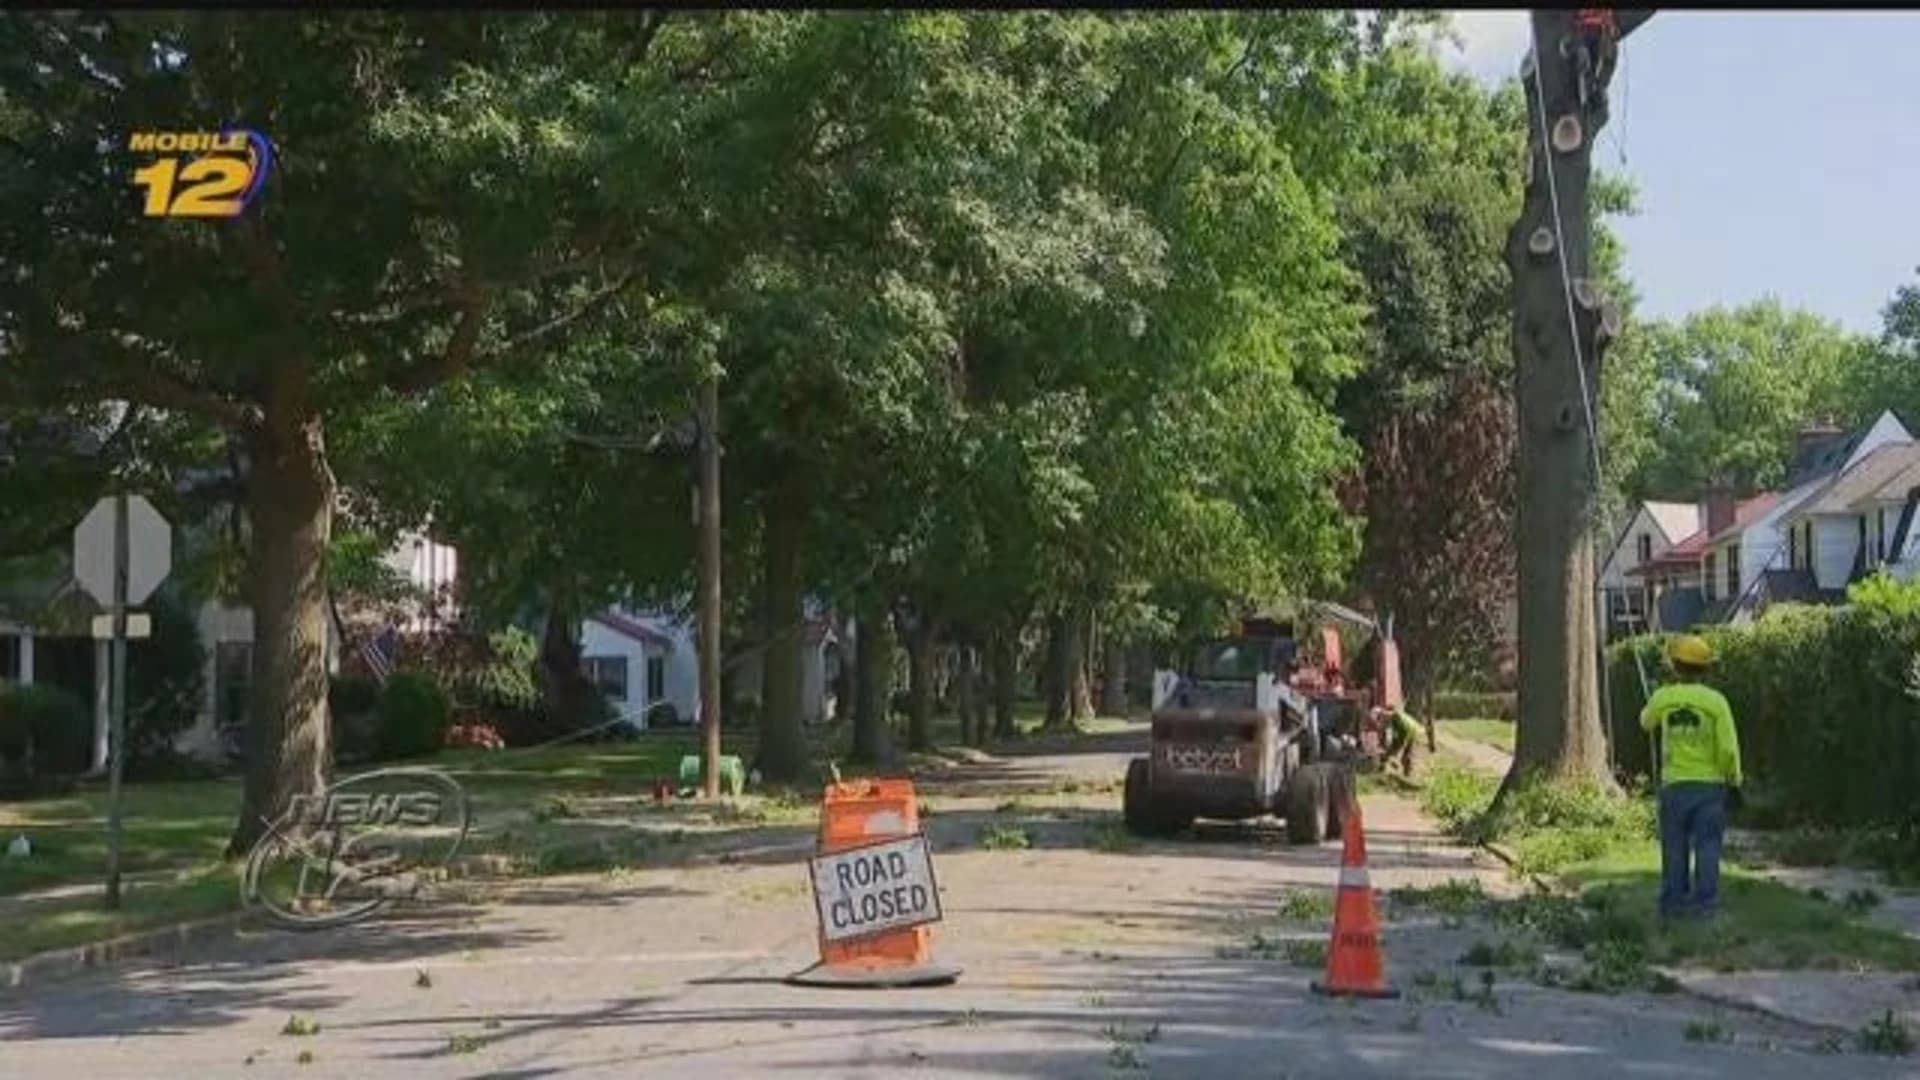 Removal of oak trees in Floral Park upsets neighbors